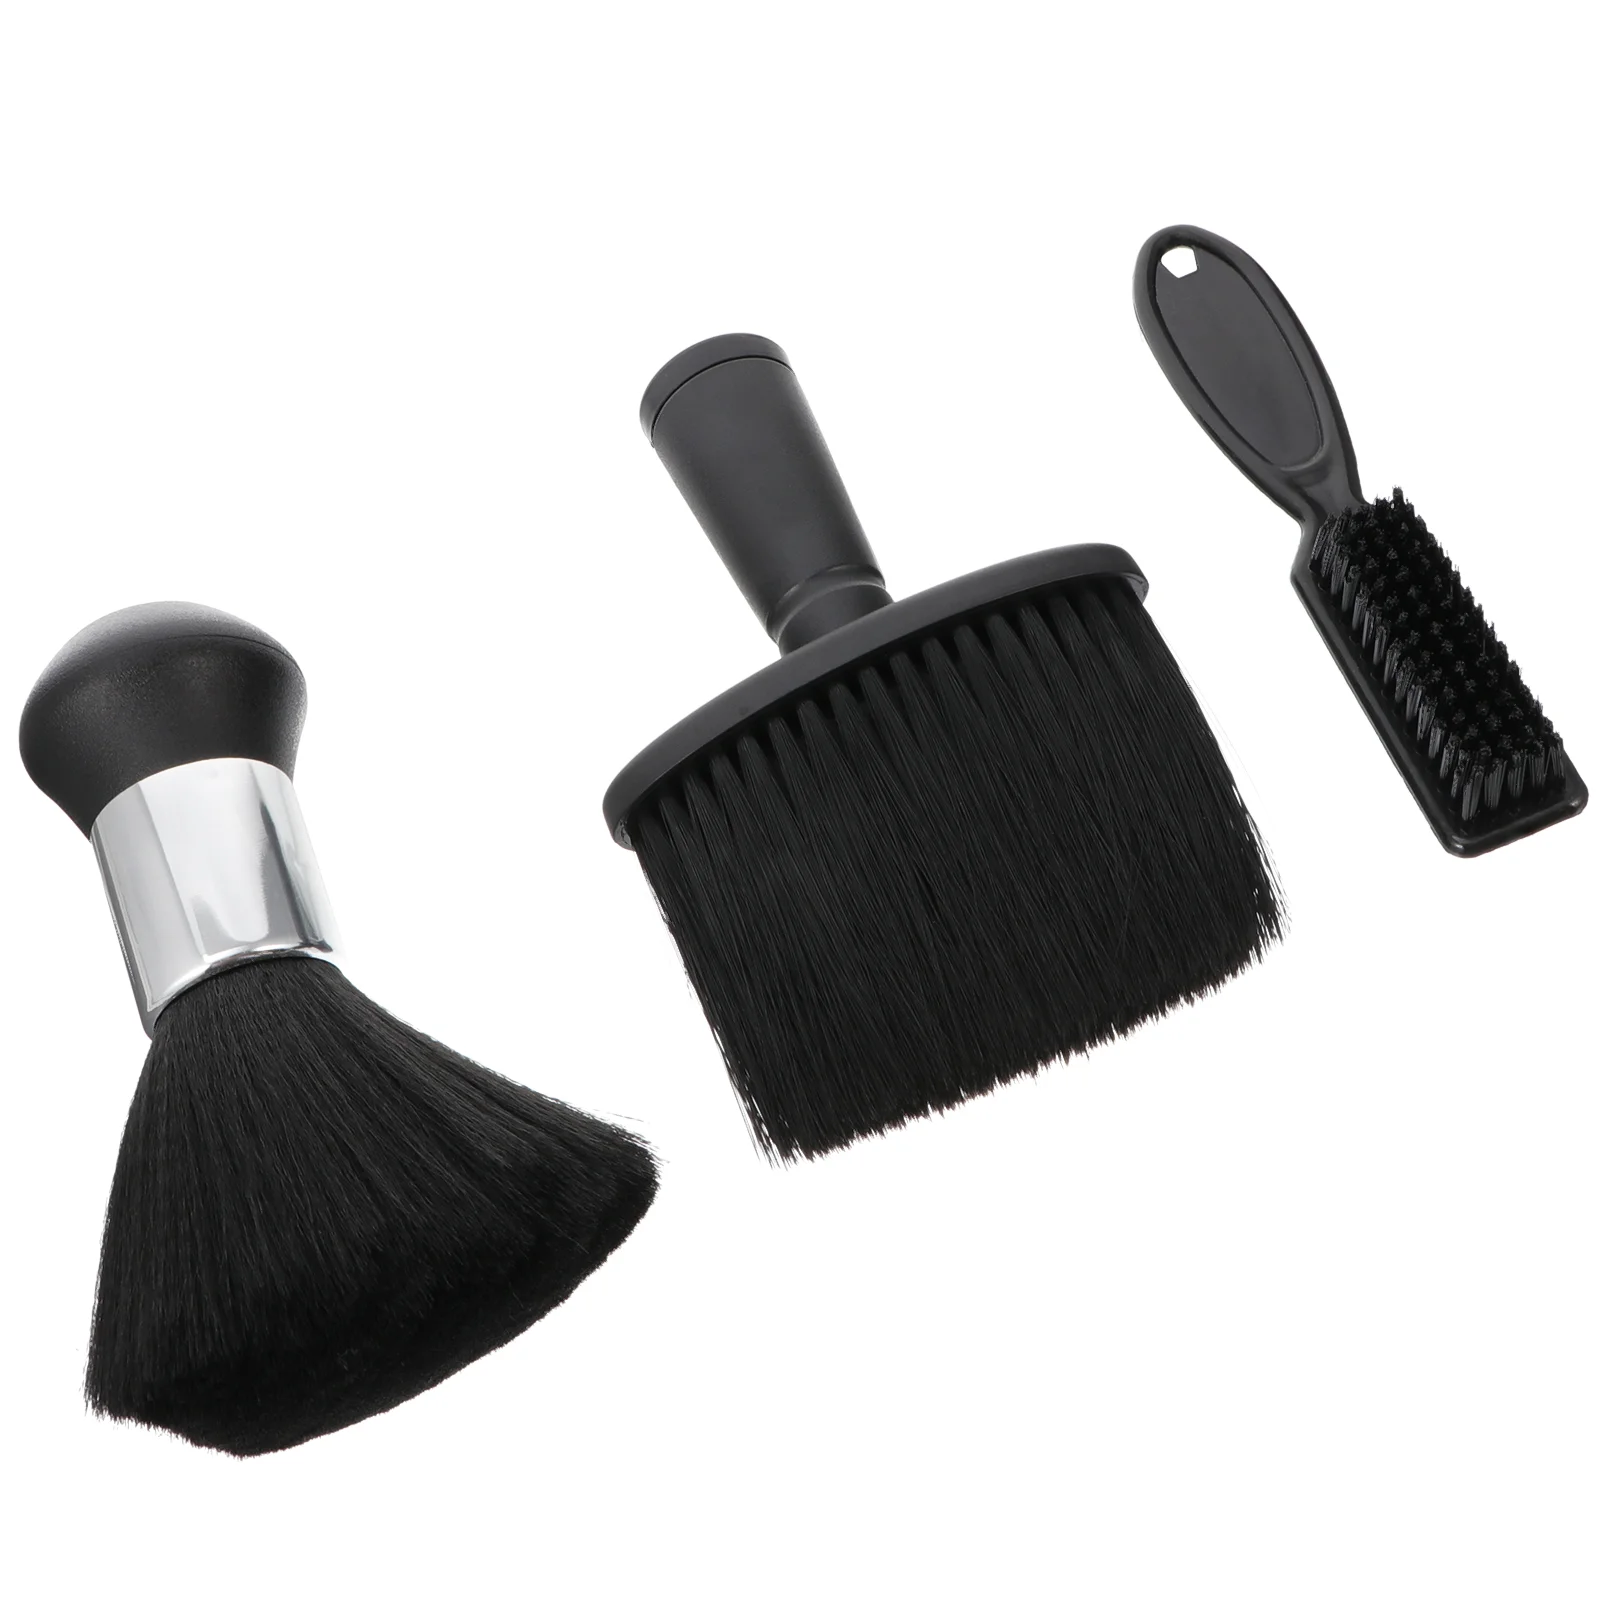 

Brush Hair Duster Neck Barber Cutting Cleaning Haircut Hairdressing Broken Remover Barbers Face Tool Sweep Brushes Set Large